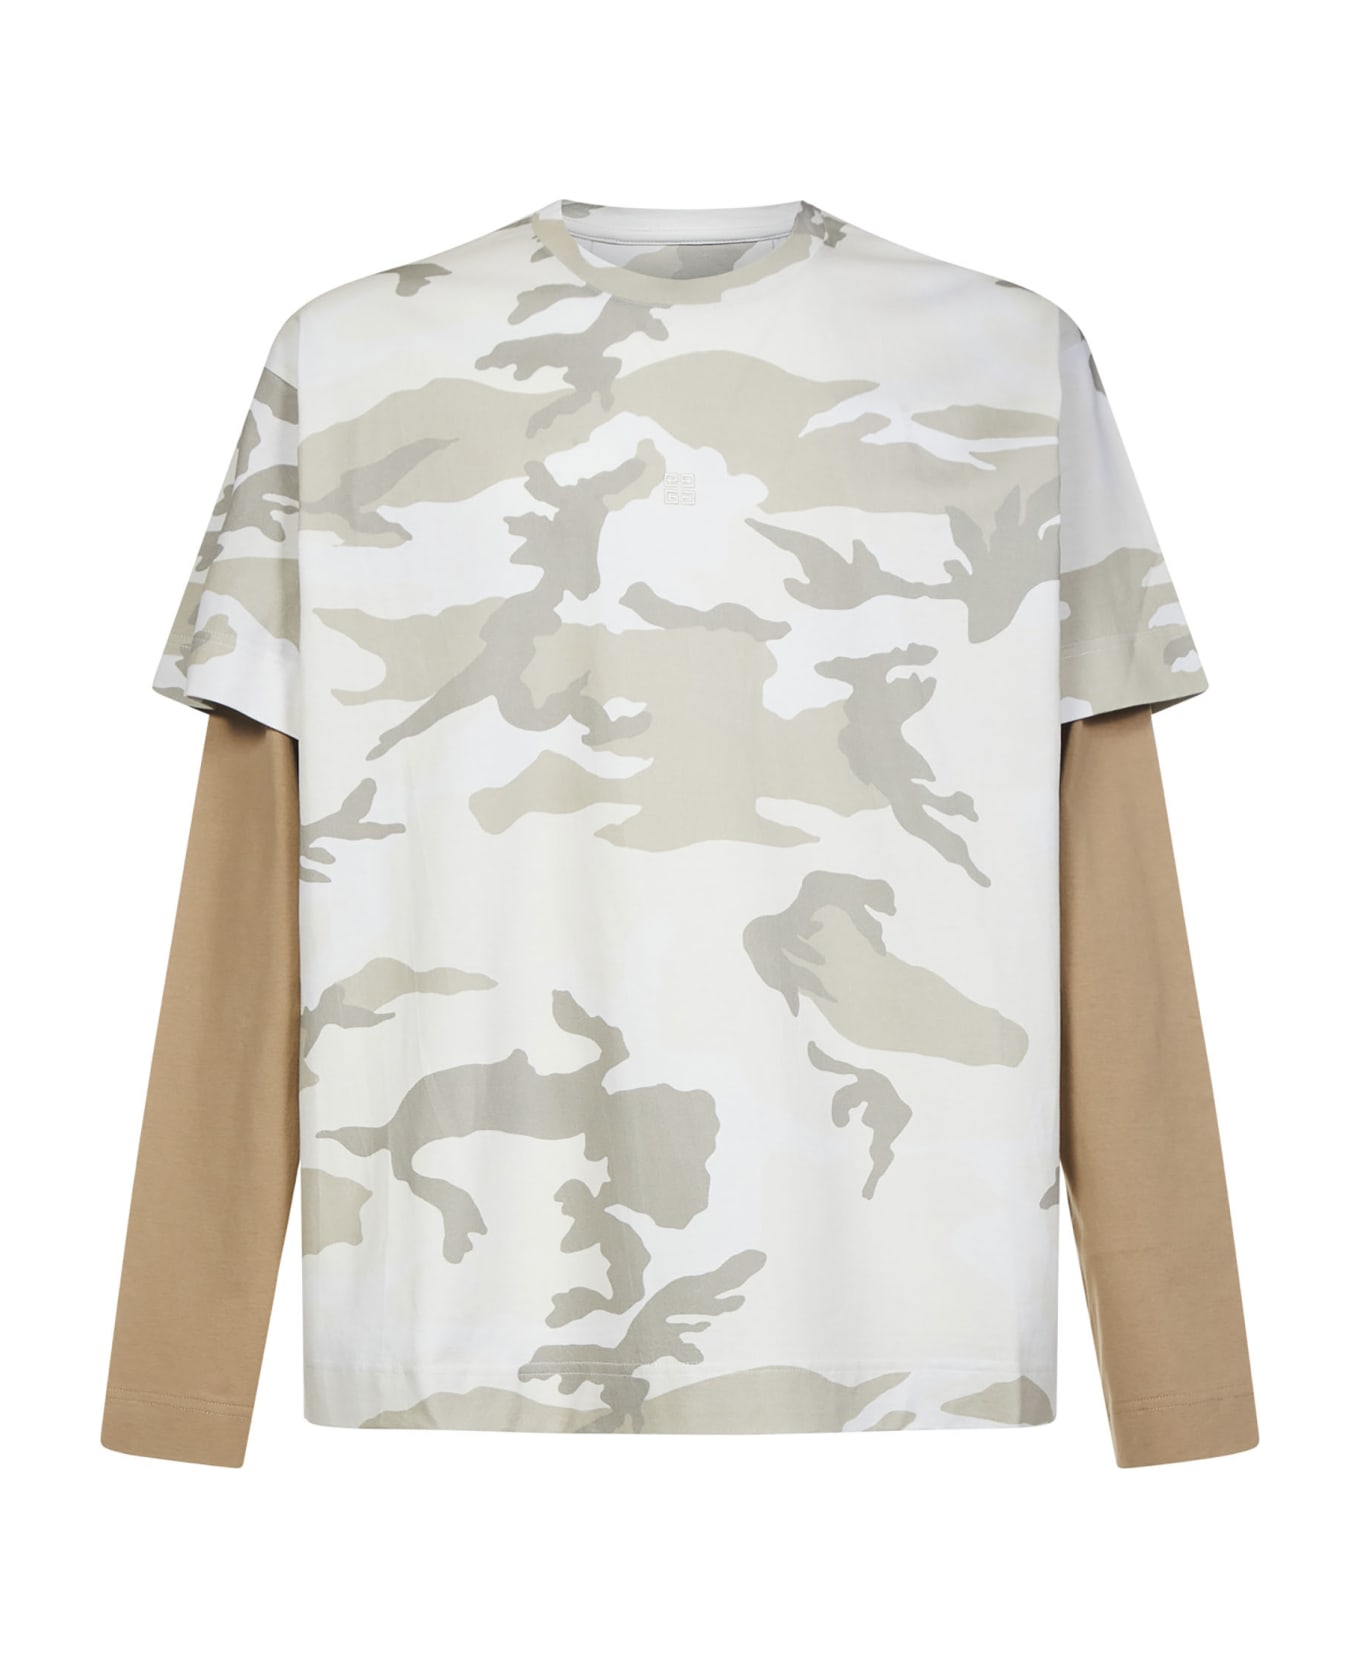 Givenchy T-shirt - Beige